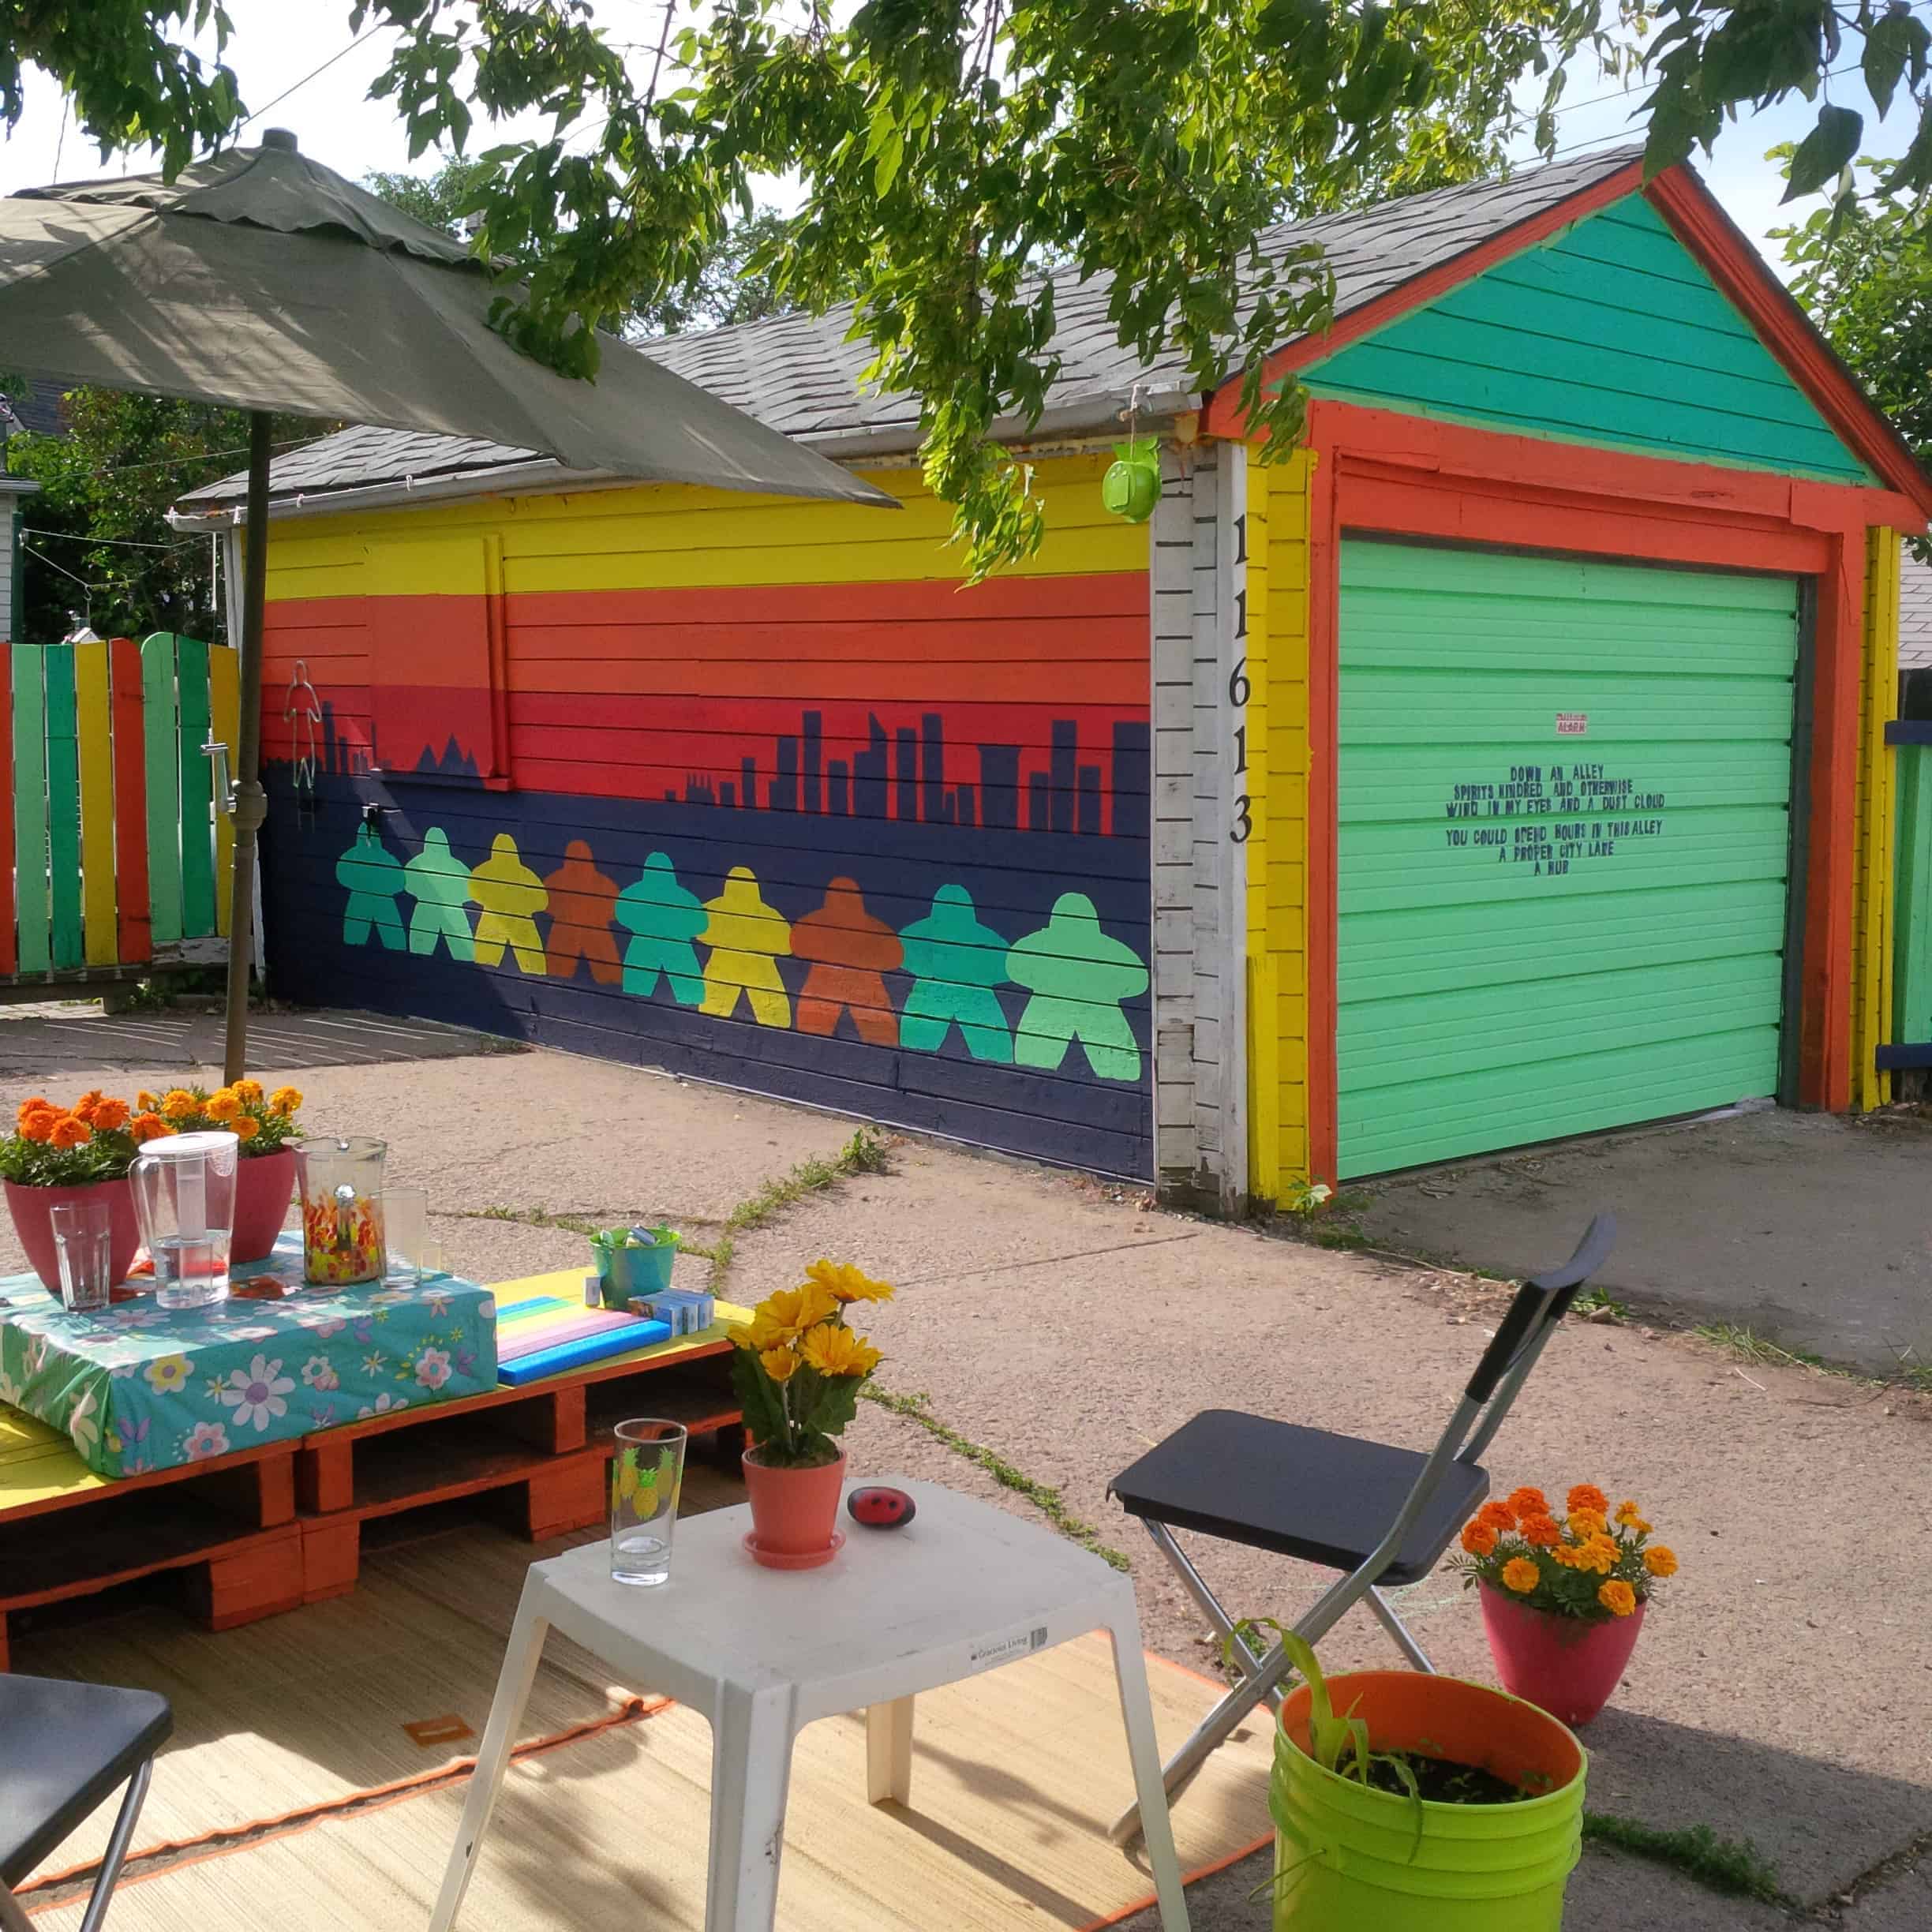 Beautifying communities and alleys